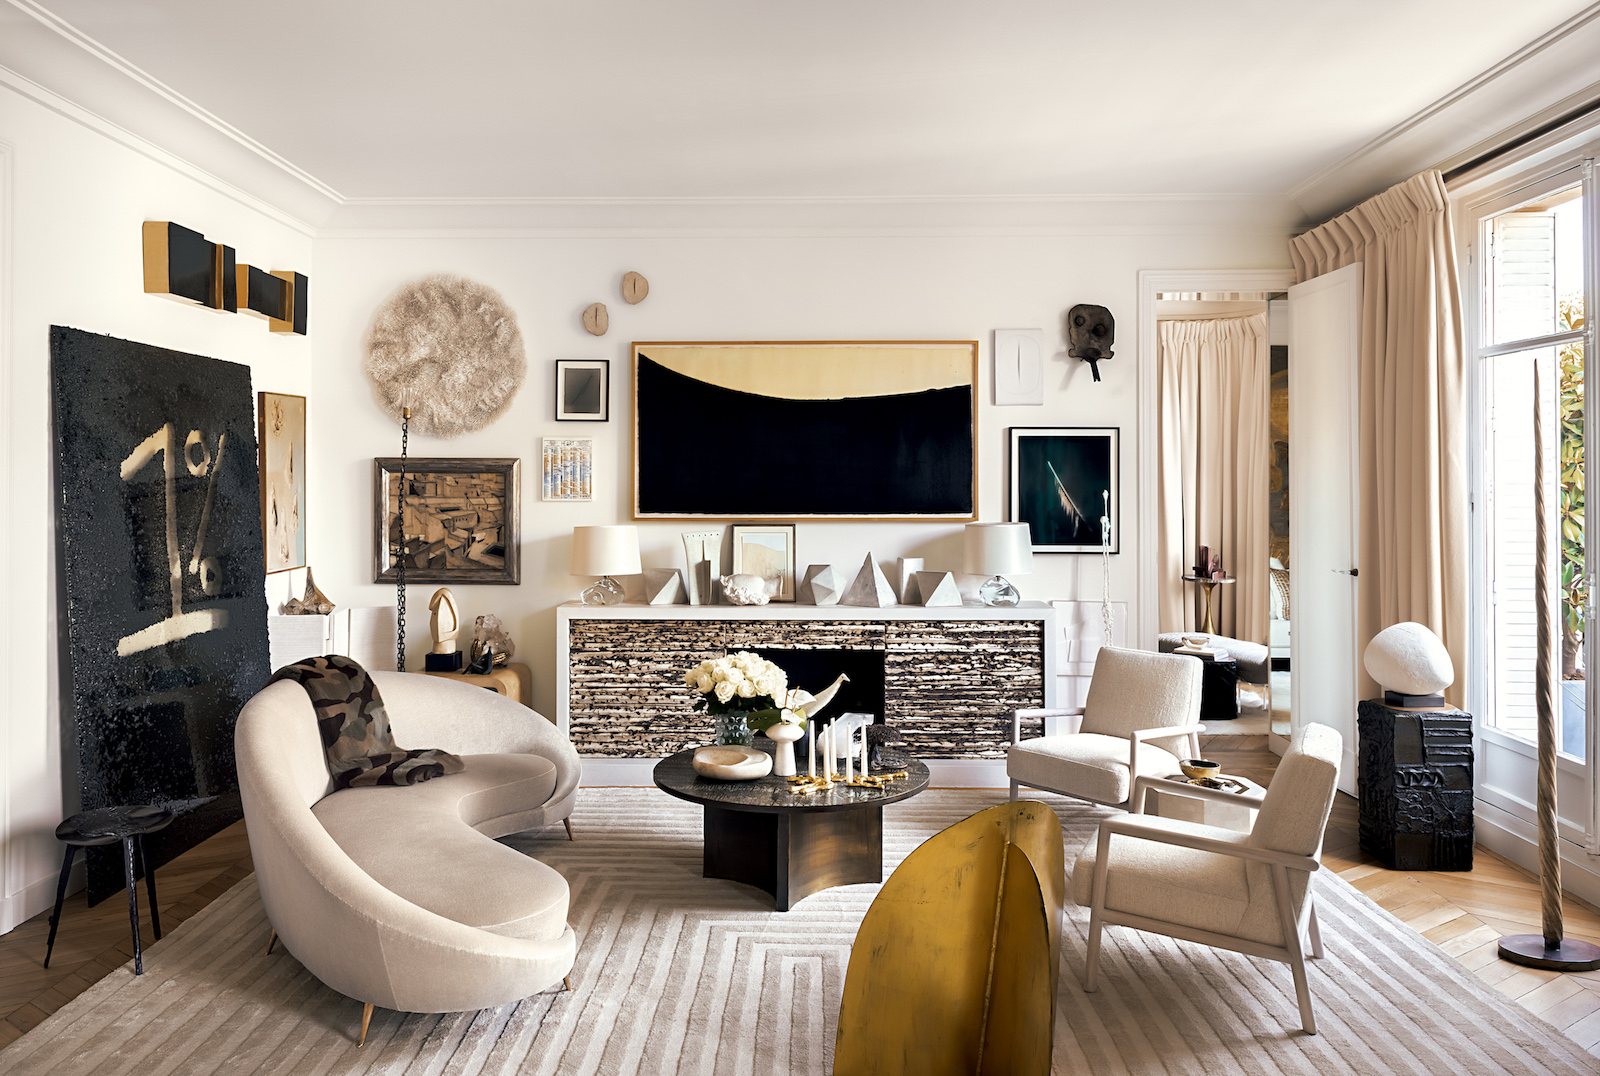 The New Chic French Style from Today’s Leading Interior Designers